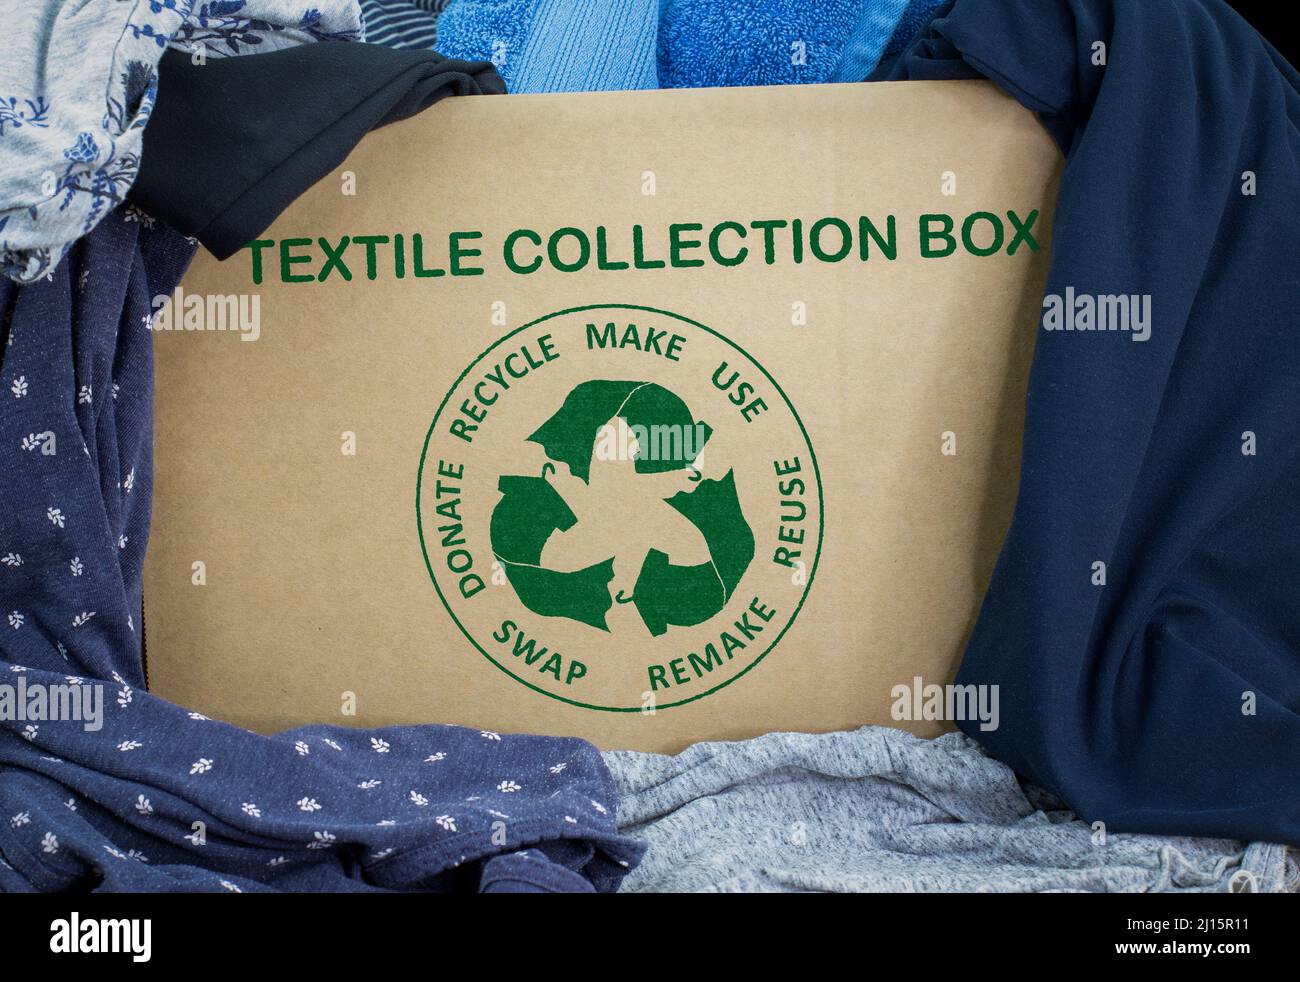 Circular Economy Textiles logo on collection box, make, use, reuse, swap, donate, recycle with eco clothes recycle icon sustainable fashion concept Stock Photo